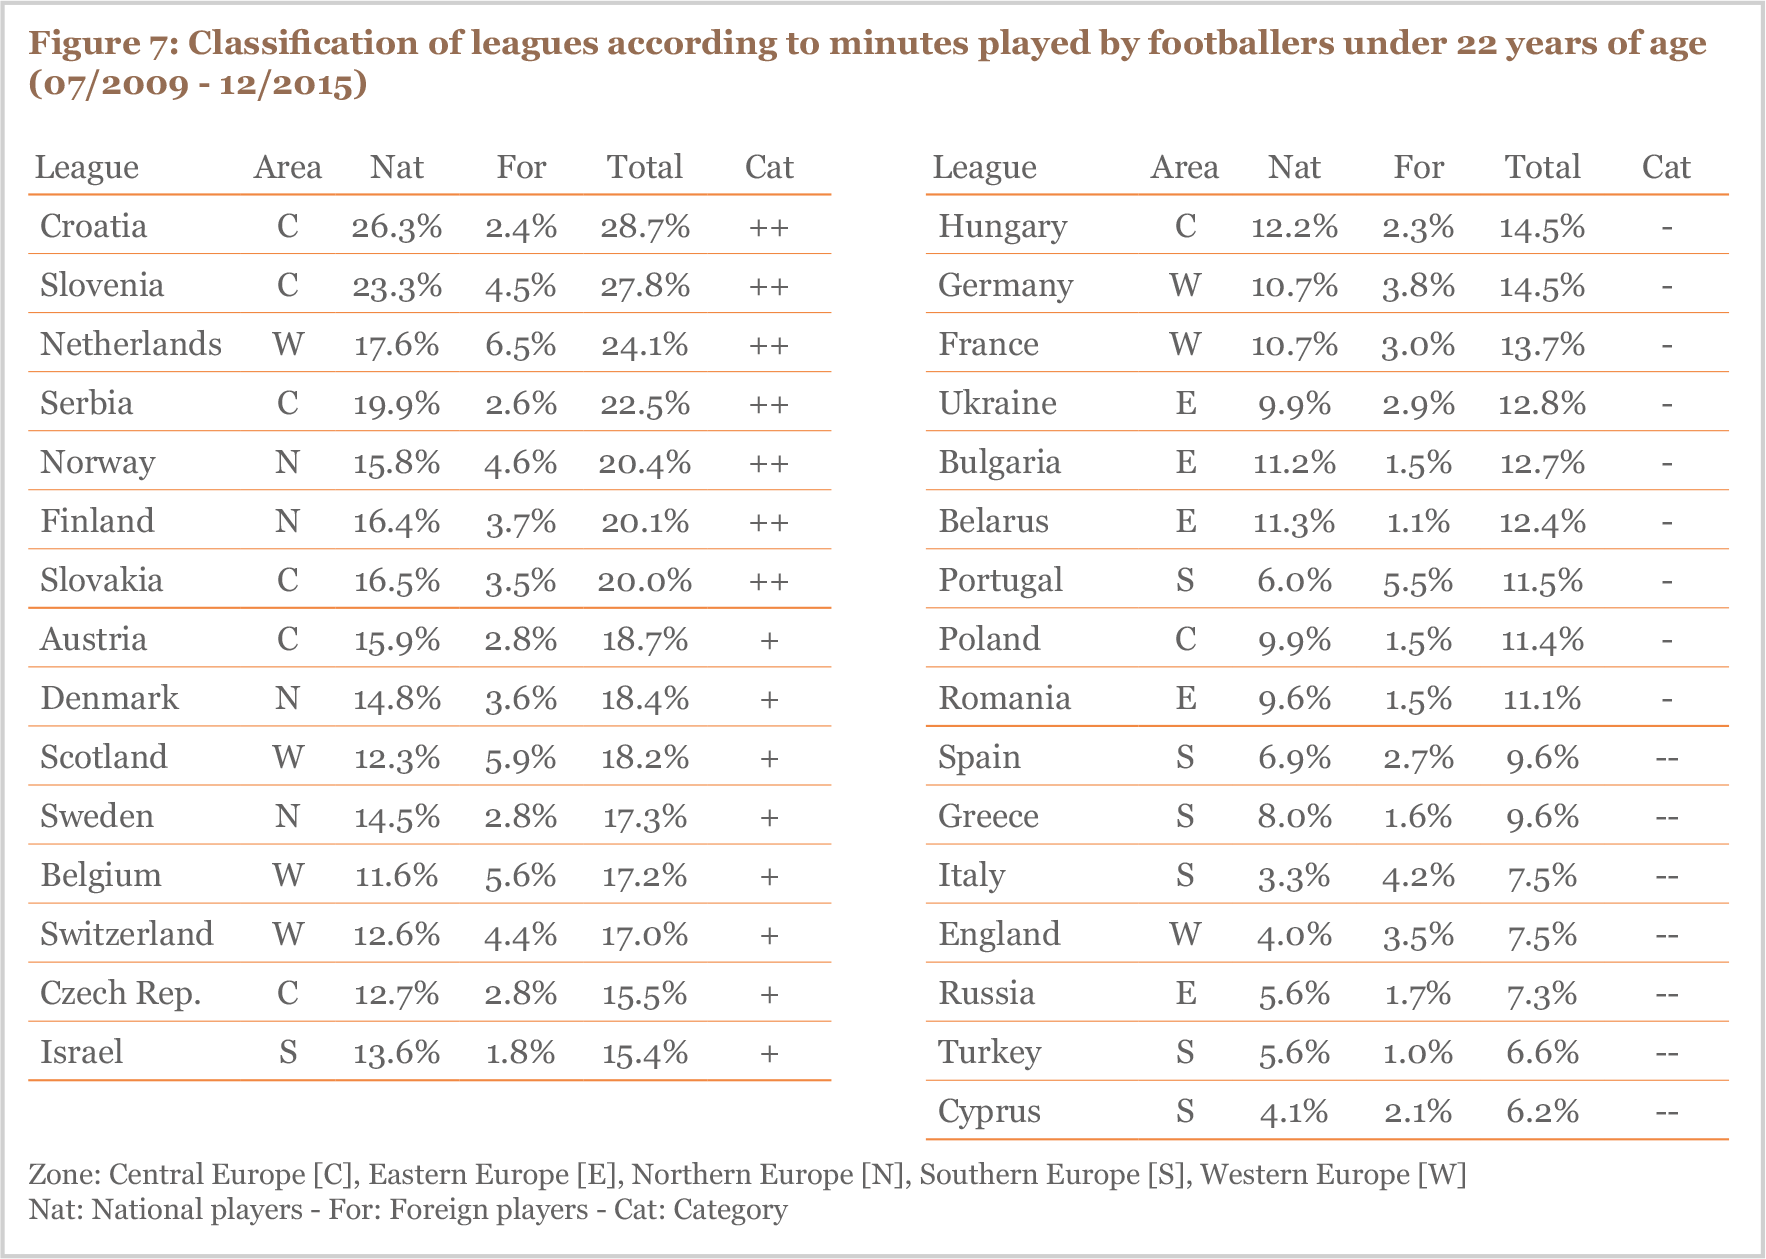 Classification of leagues according to minutes played by footballers under 22 years of age (07/2009 - 12/2015)